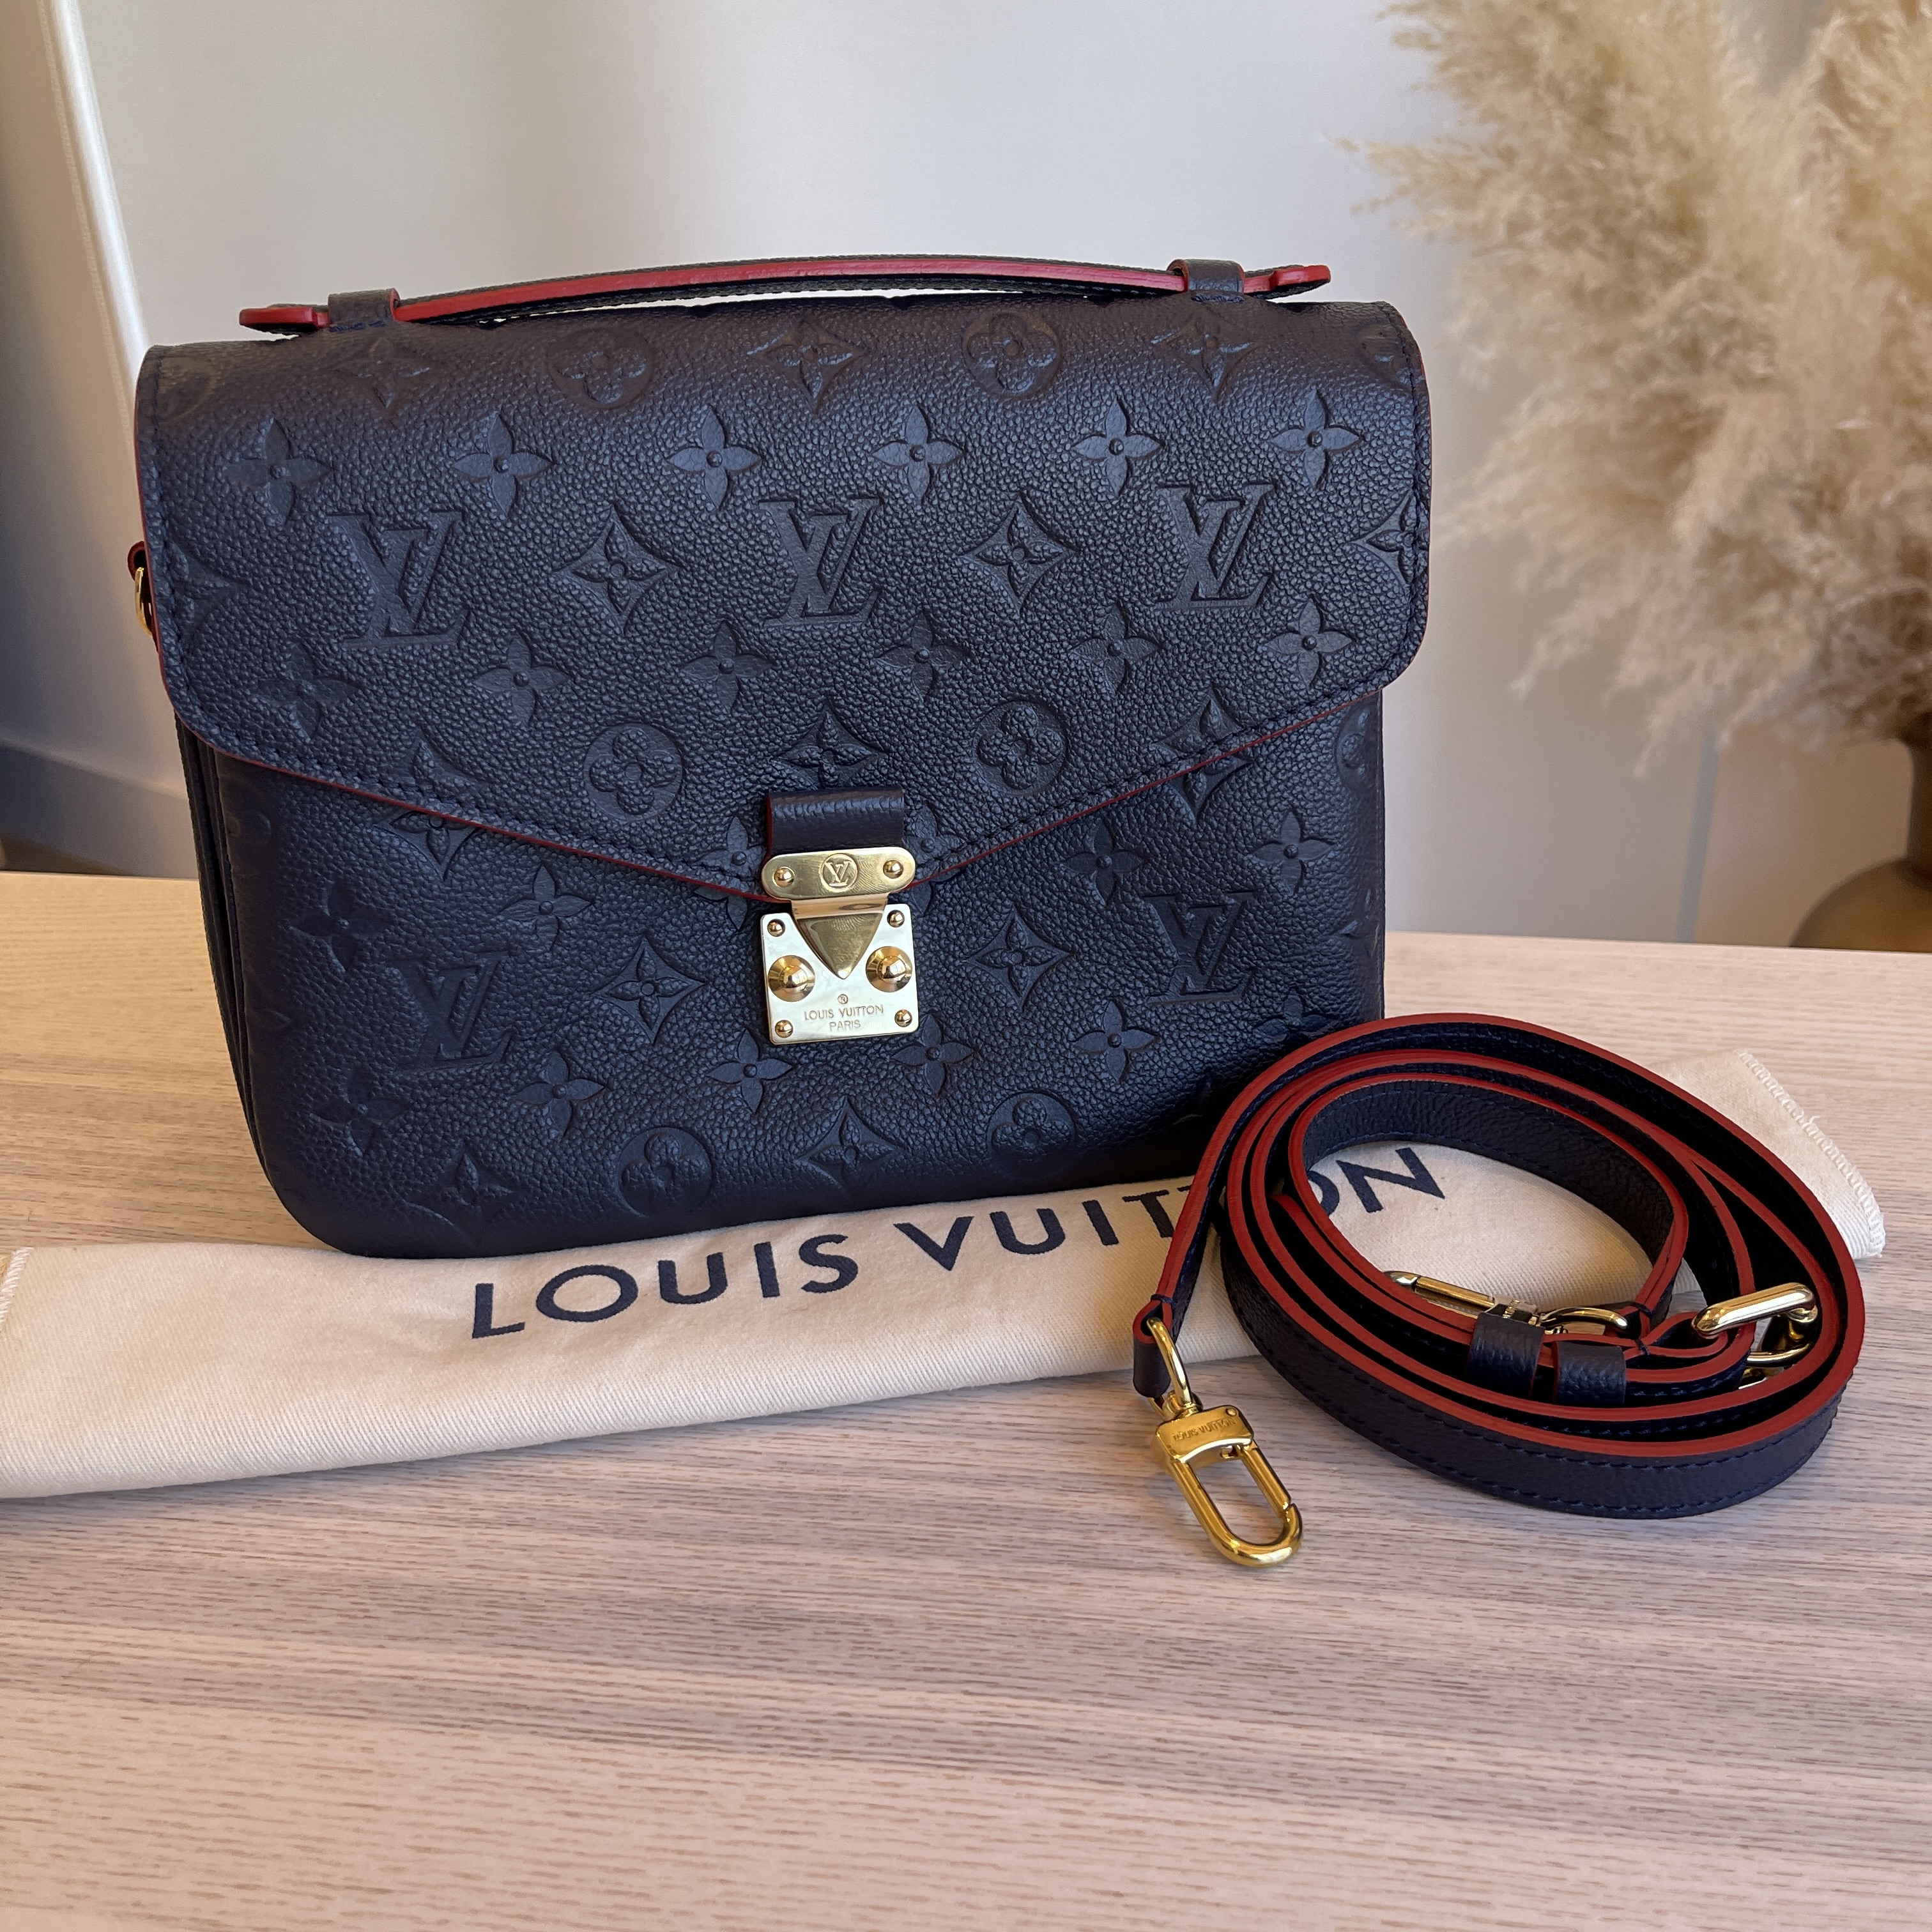 REFERENCE] Authentic Louis Vuitton Pochette Metis Empreinte Noir vs Rep  Marine Rouge From An Factory : r/WagoonLadies